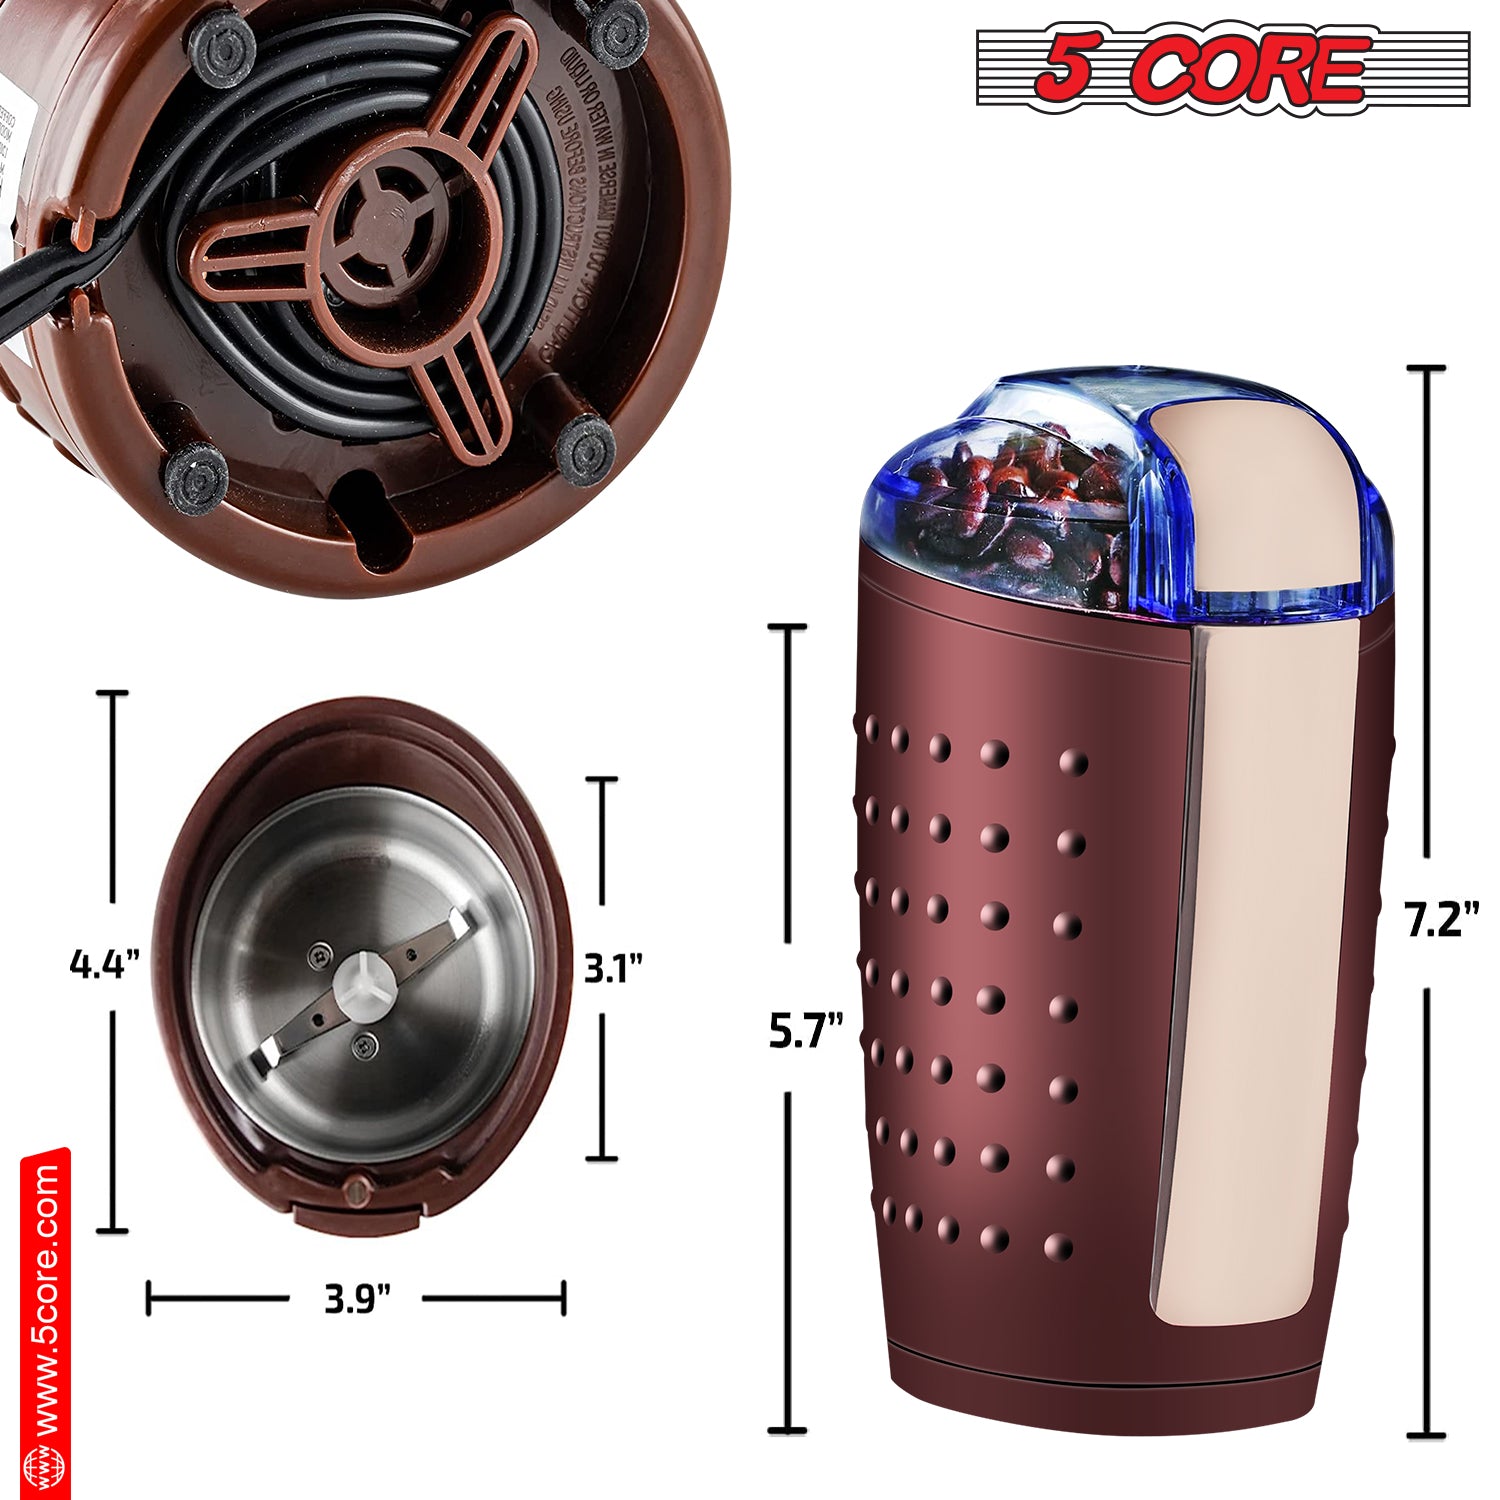 Compact and Efficient 5 Core Coffee Grinder CG 01 BR - 150W, 85g Capacity in Stylish Brown